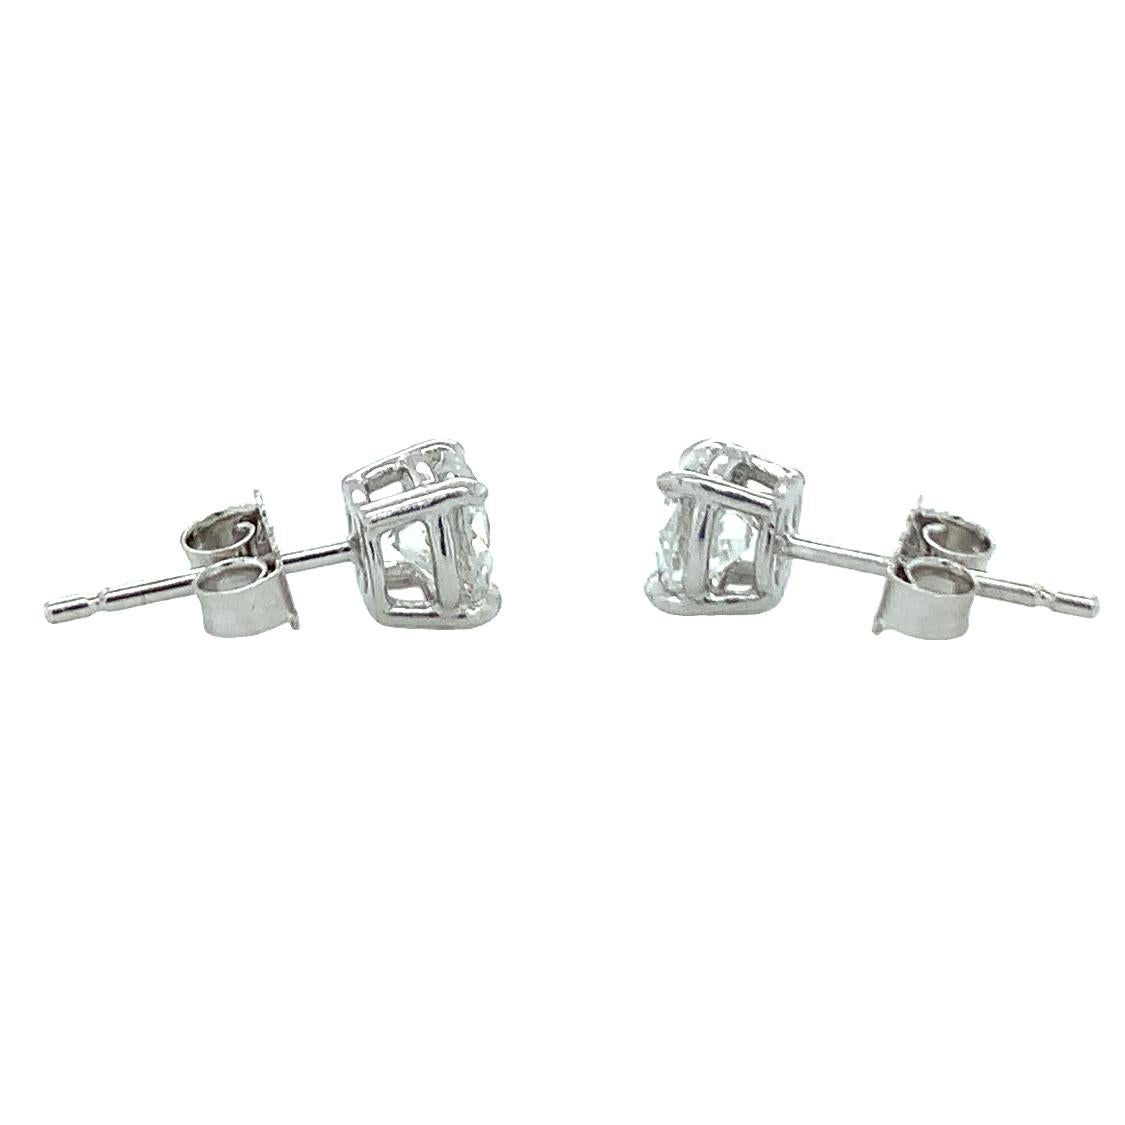 One pair of platinum diamond stud earrings featuring two prong set, round brilliant cut diamonds totaling 1.10 ct. total weight (0.56 ct., E / VS-1 + 0.54 ct., F / VS-1 with GIA E-Reports). Featuring push back backings and weighing 2.6 grams in